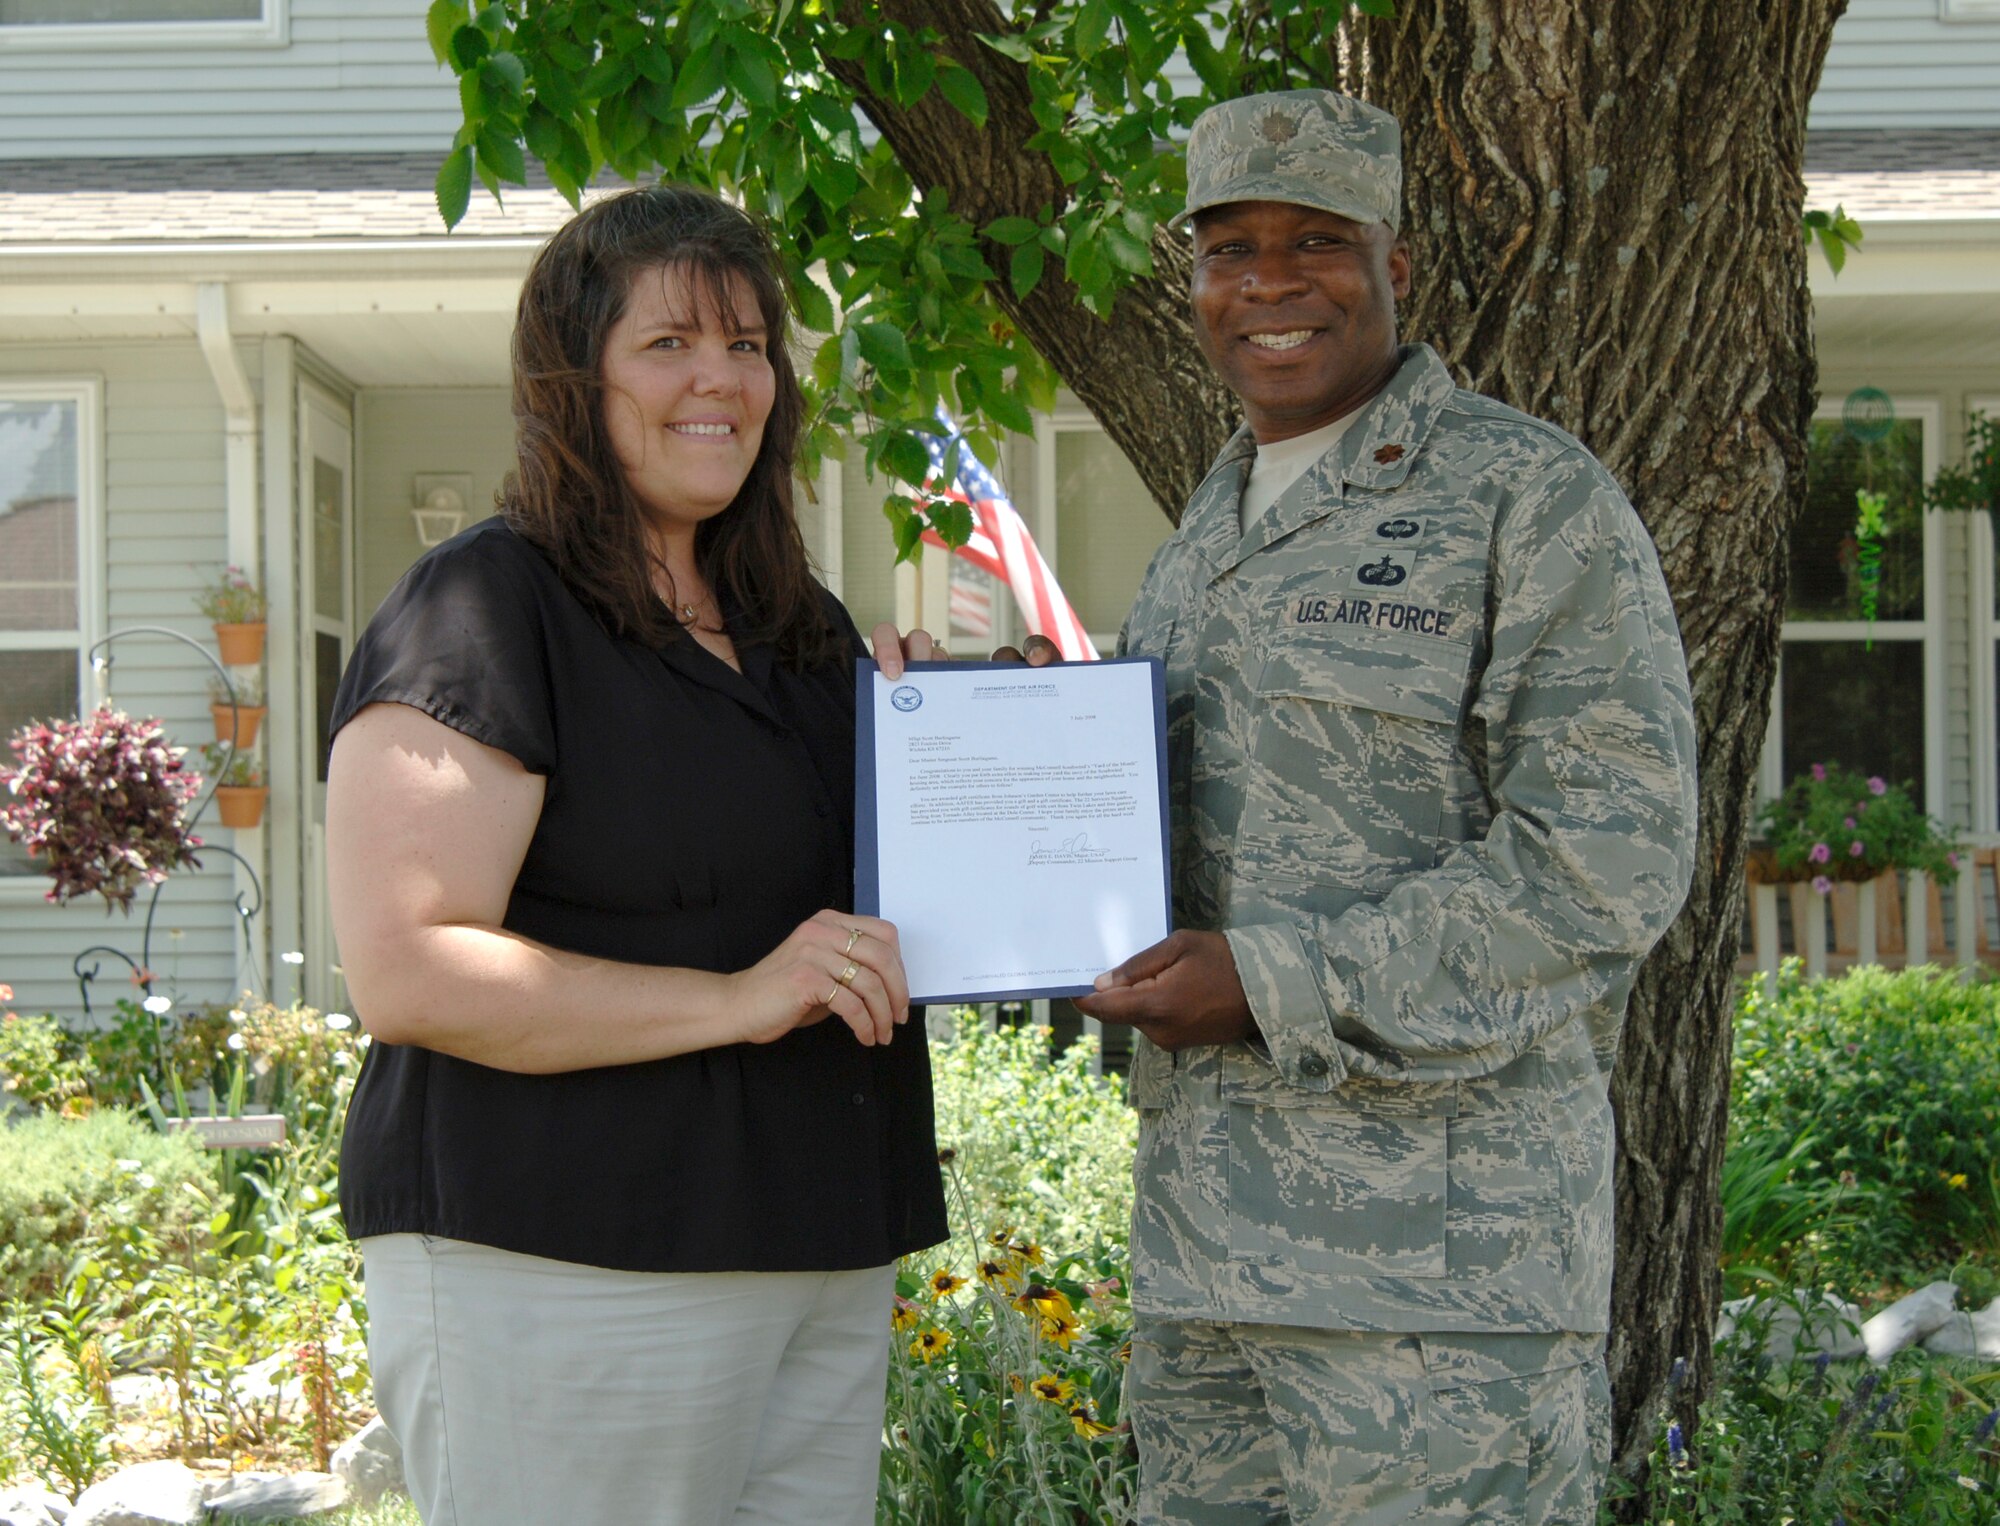 MCCONNELL AIR FORCE BASE, Kan. -- Jennifer Burlingame wife of Master Sgt. Scott Burlingame, 22nd Security Forces Squadron, is recognized by Maj. James Davis, 22nd Contracting Squadron, July 7 for winning the yard of the month, for the month of June. Mrs. Burlingame was awarded a fountain for winning yard of the month. (Photo by Senior Airman Roy Lynch)